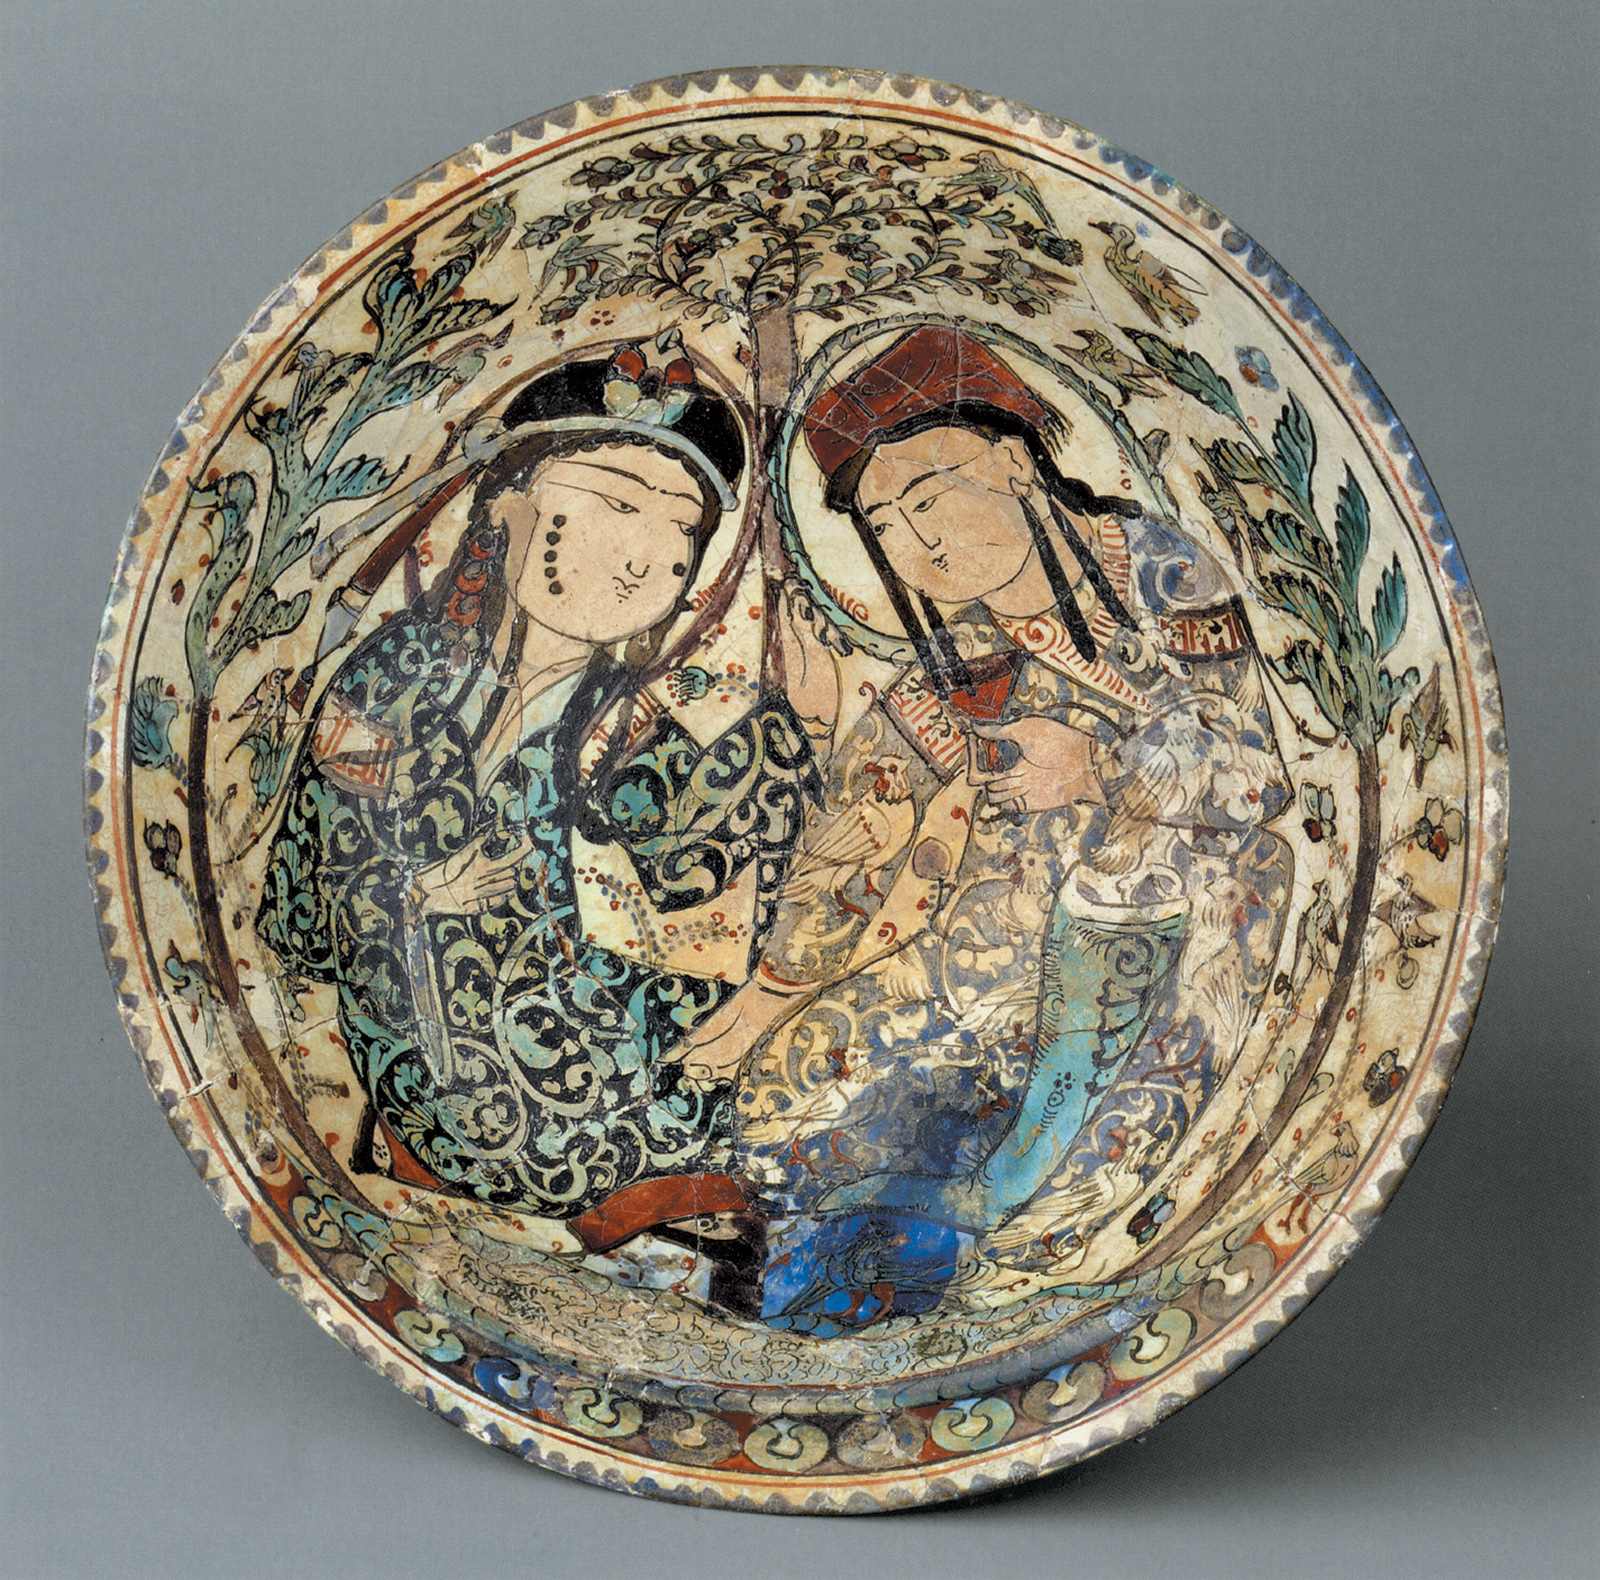 ‘Bowl with Couple in a Garden’; stonepaste plate, Iran, late twelfth–early thirteenth century